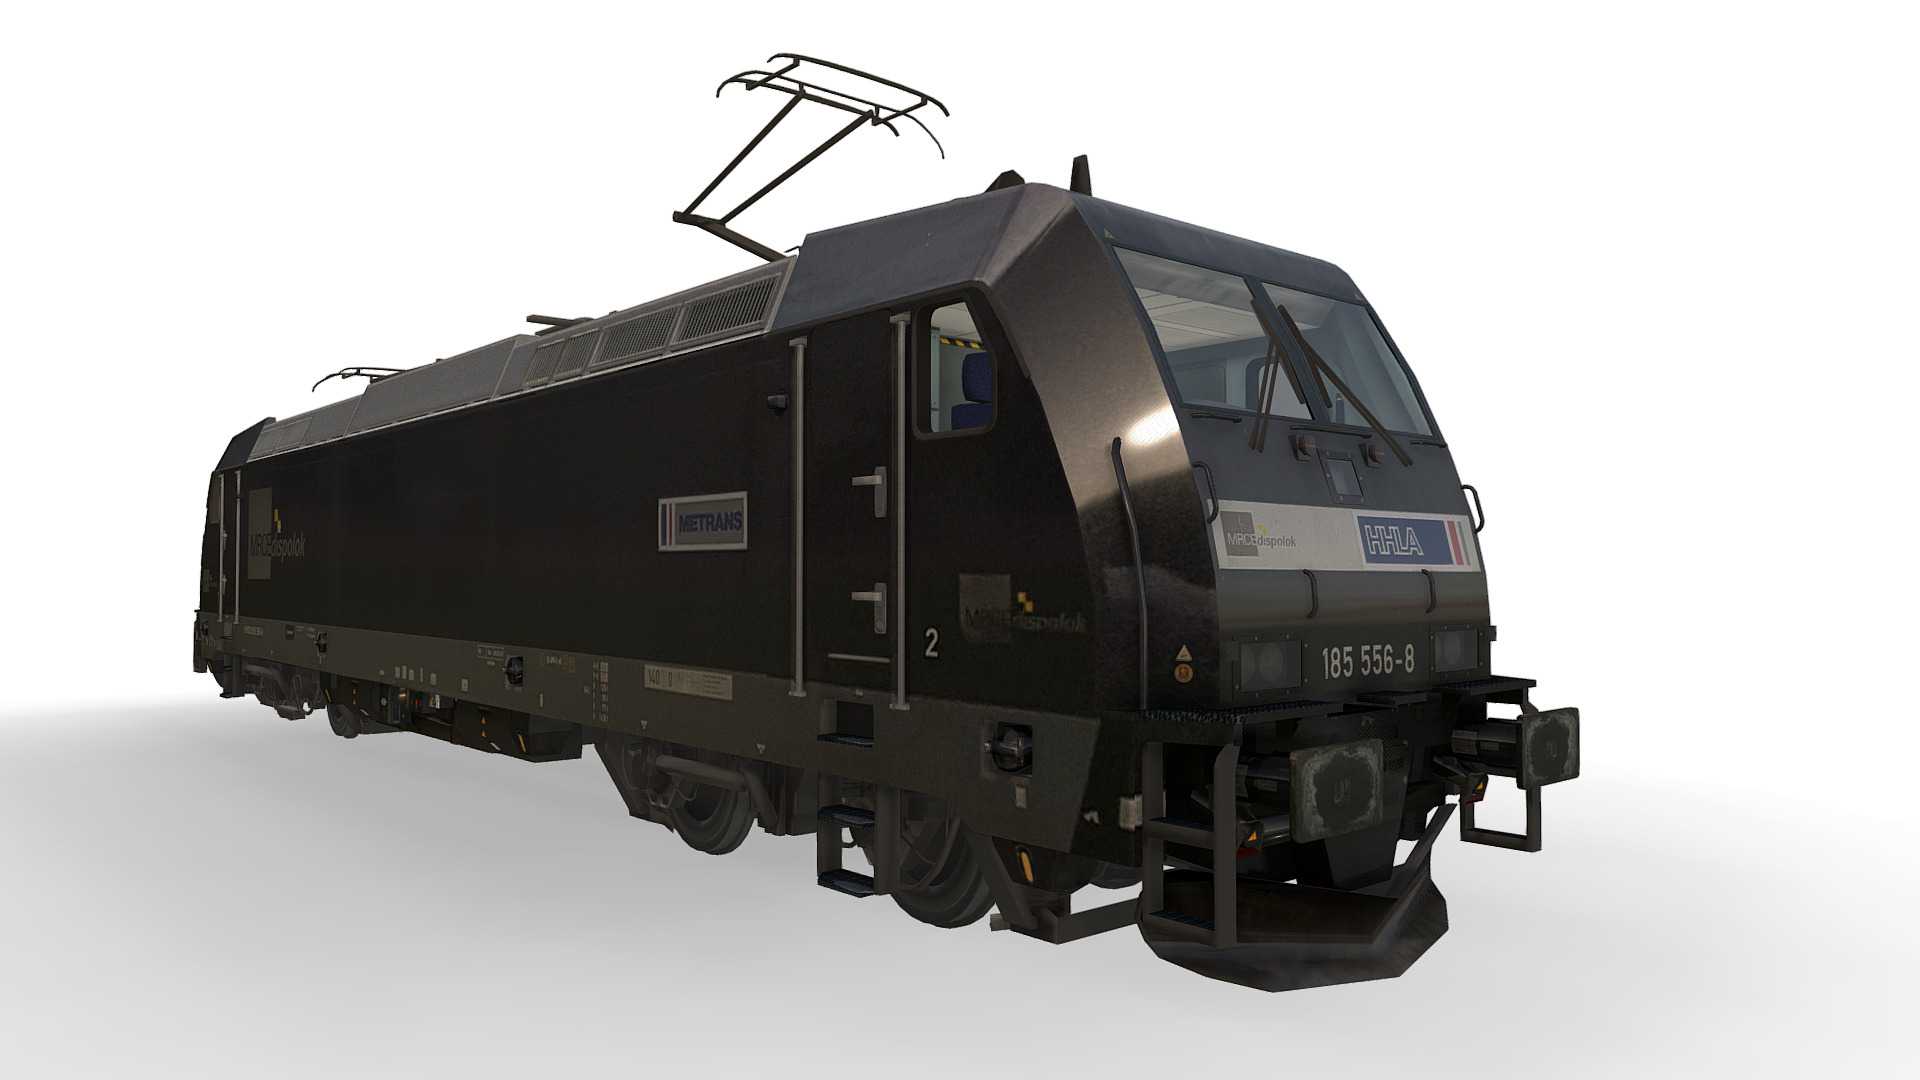 3D model Locomotive Class 185 556-8 – MRCE - This is a 3D model of the Locomotive Class 185 556-8 - MRCE. The 3D model is about a black train with a white background.